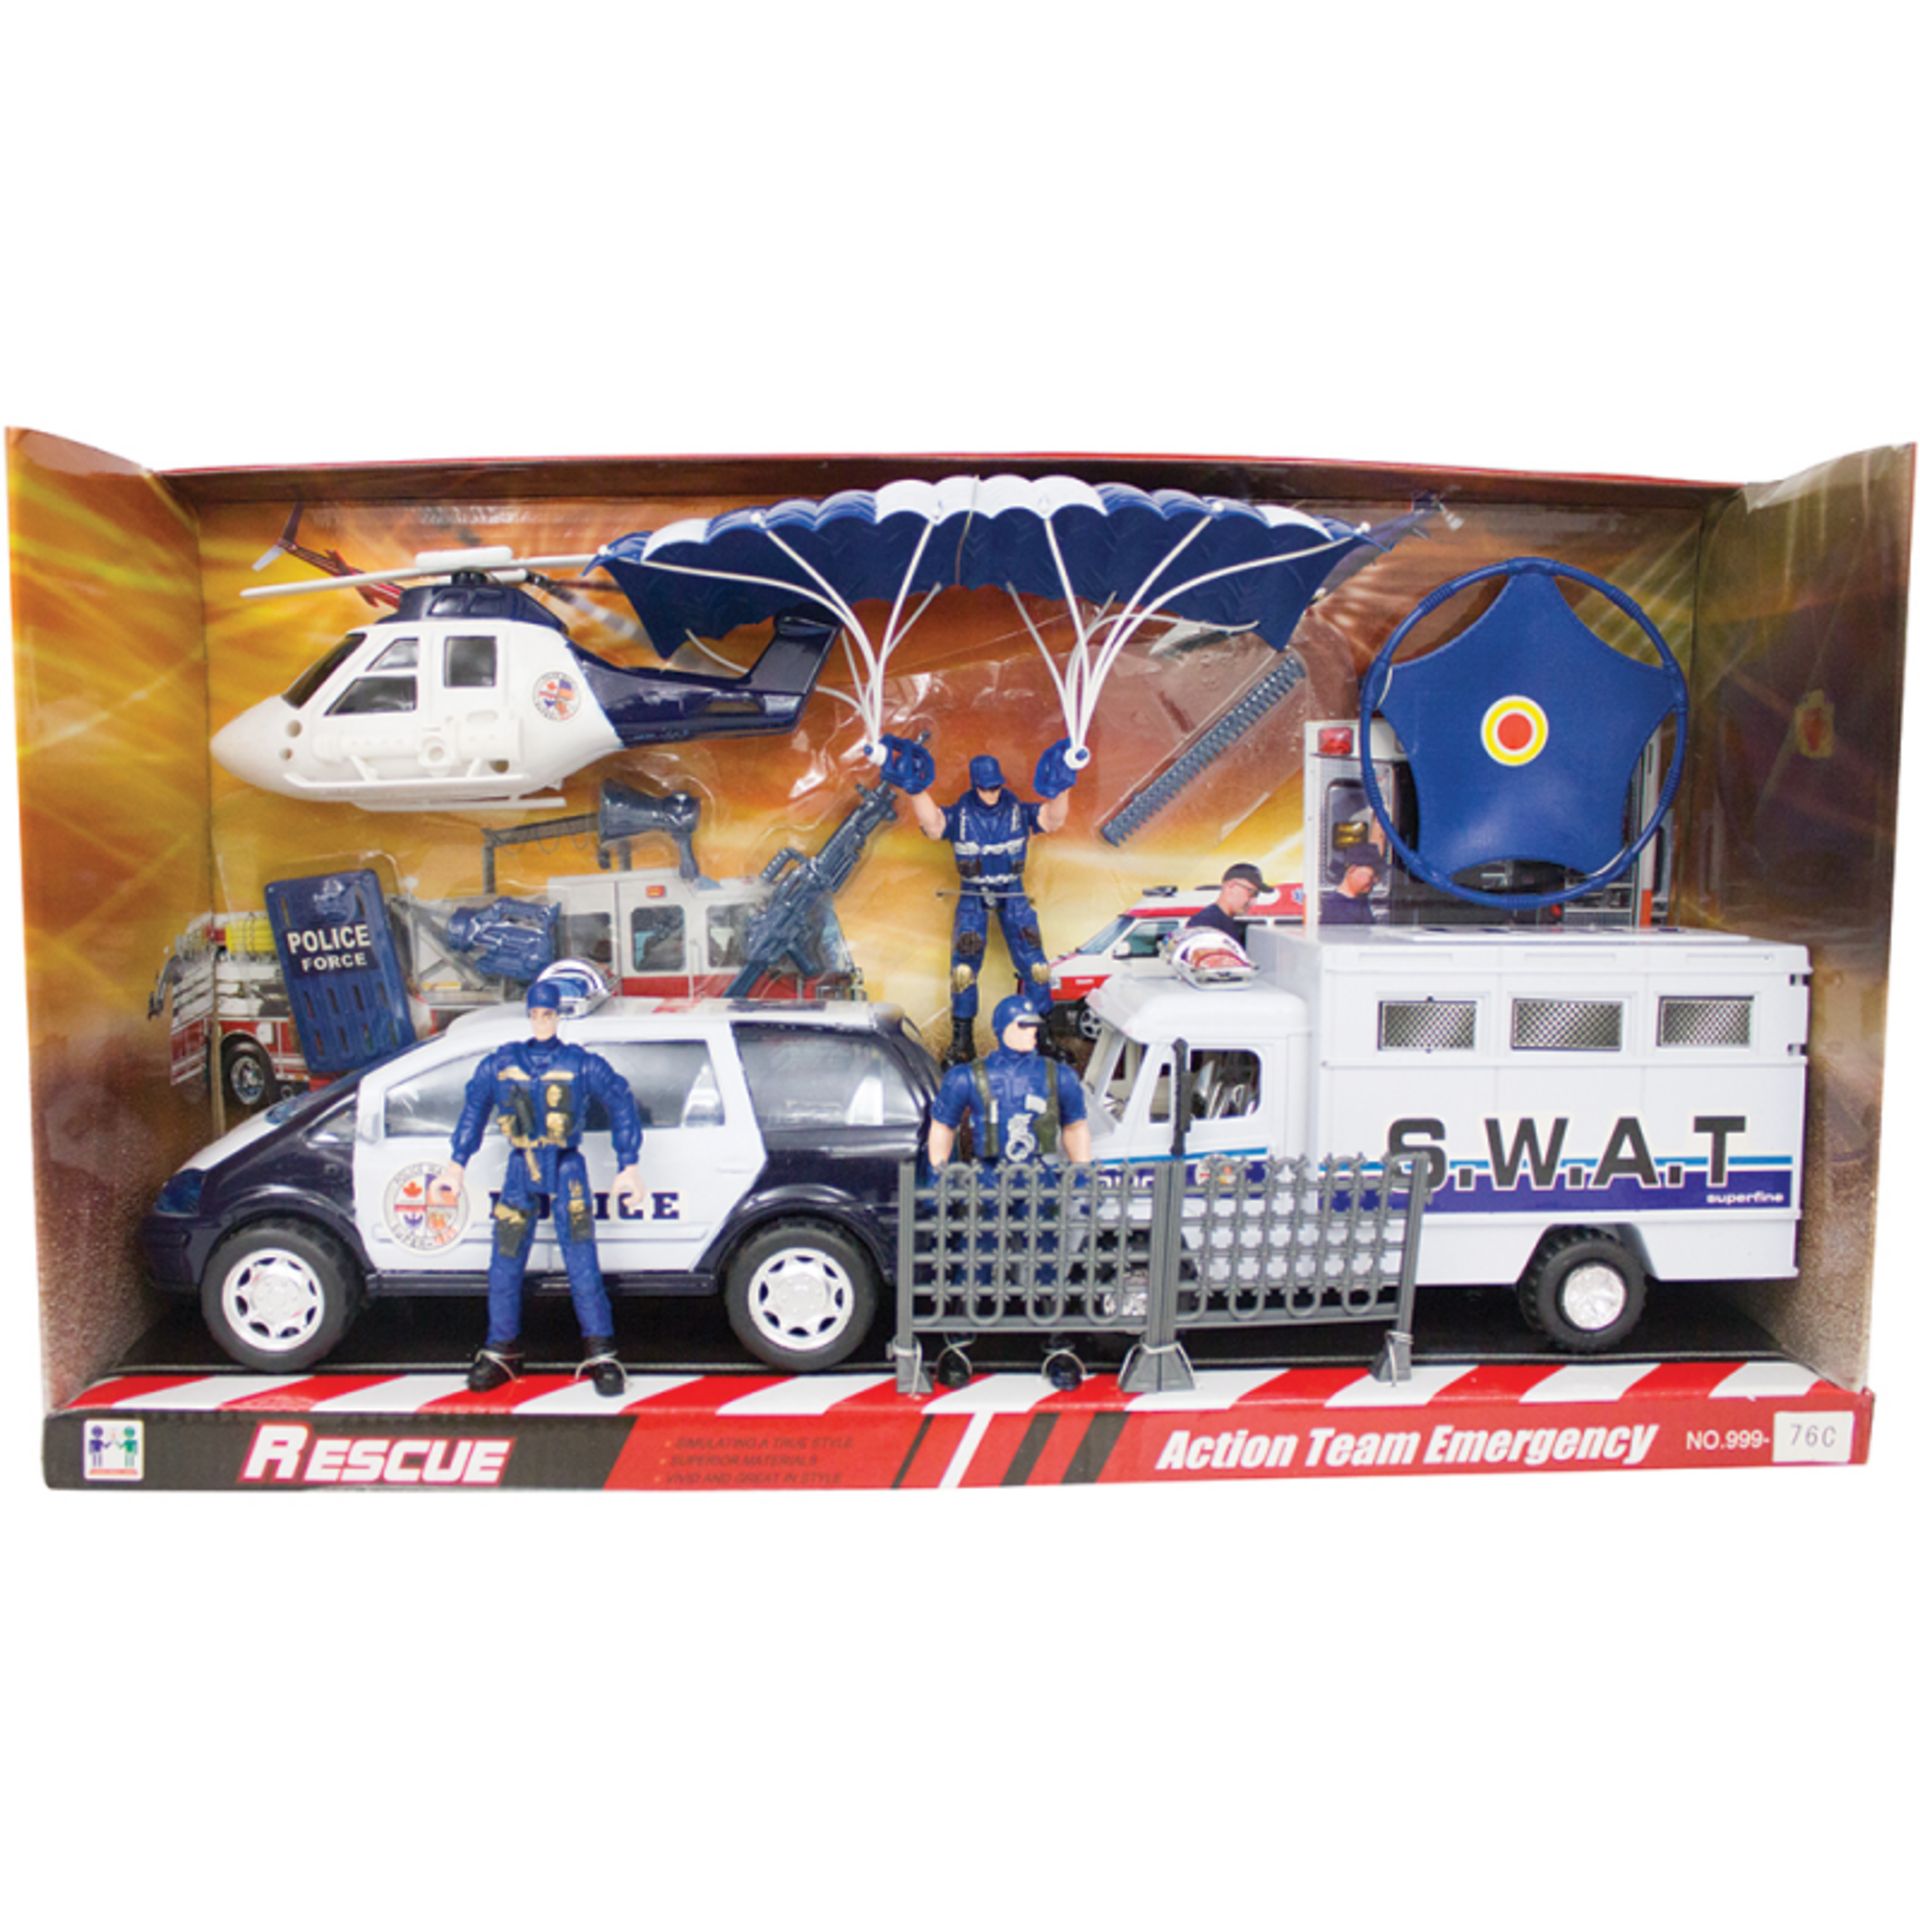 V Brand New Action Team Emergency Rescue Play Set With Helicopter - Police Car SWAT Vehicle -